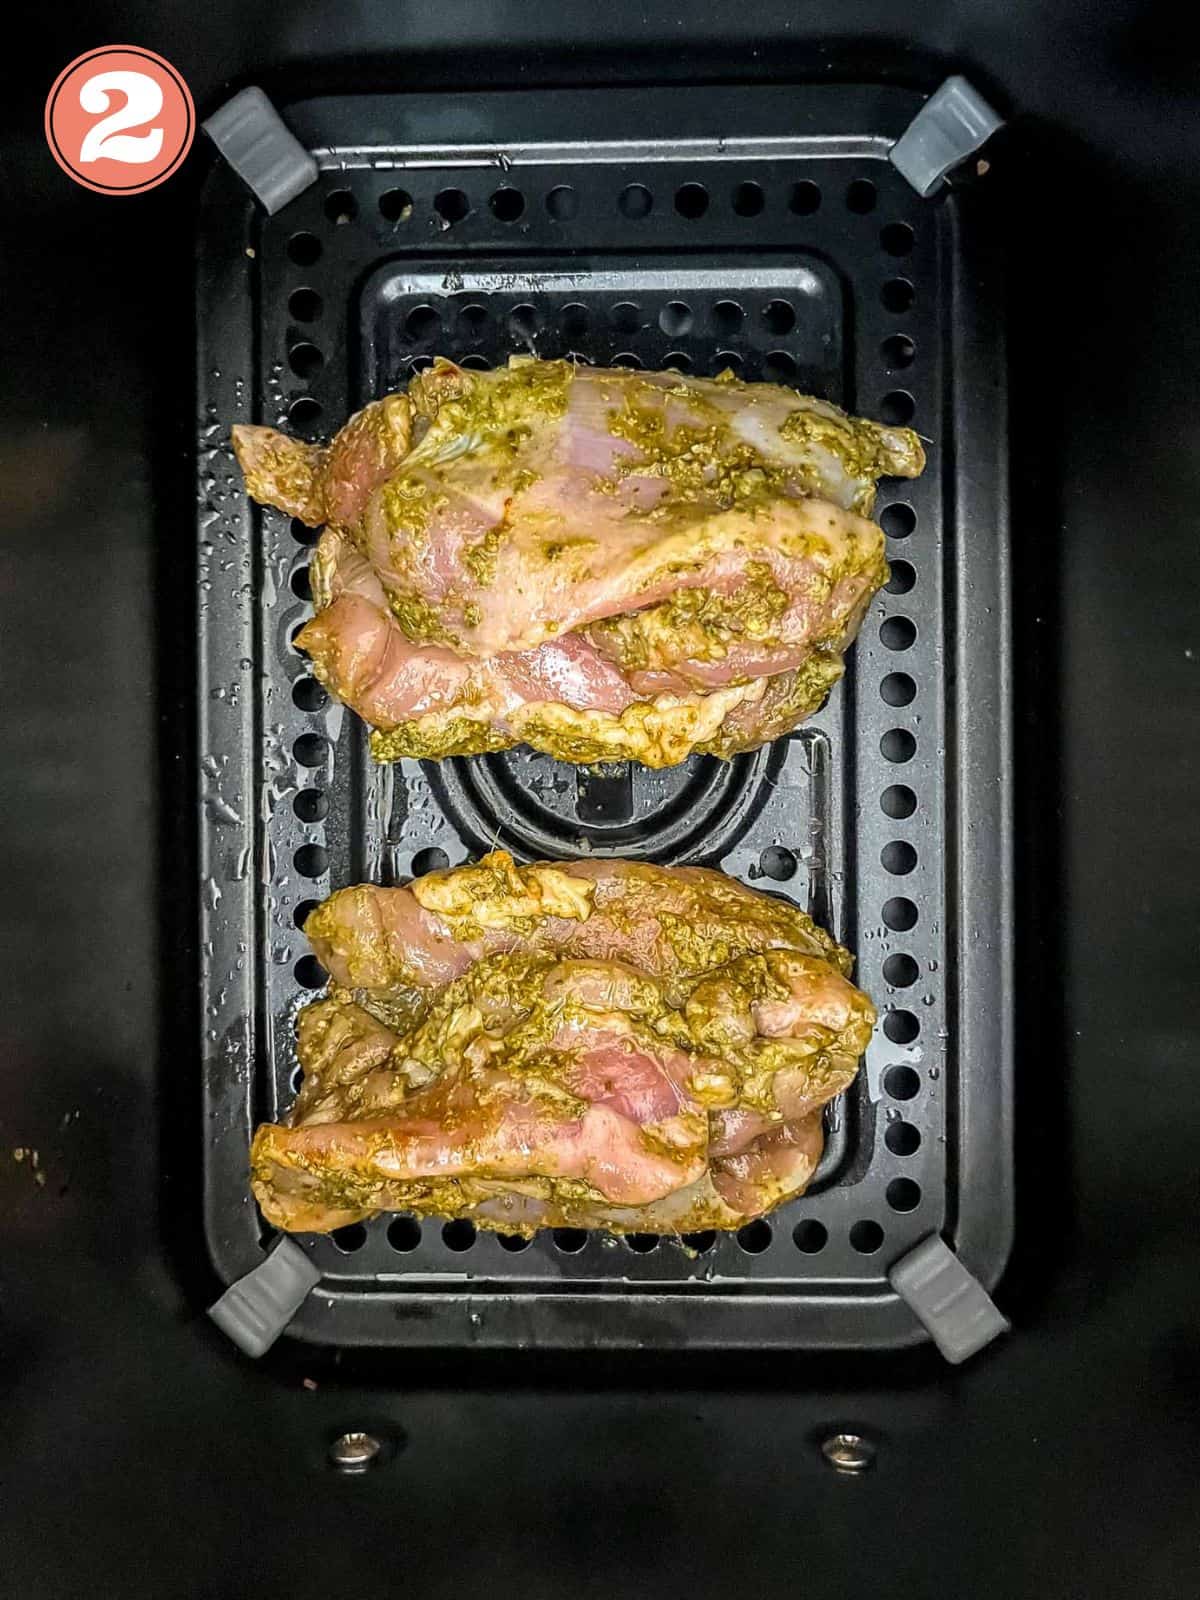 pesto coated chicken thighs in an air fryer basket labelled number two.